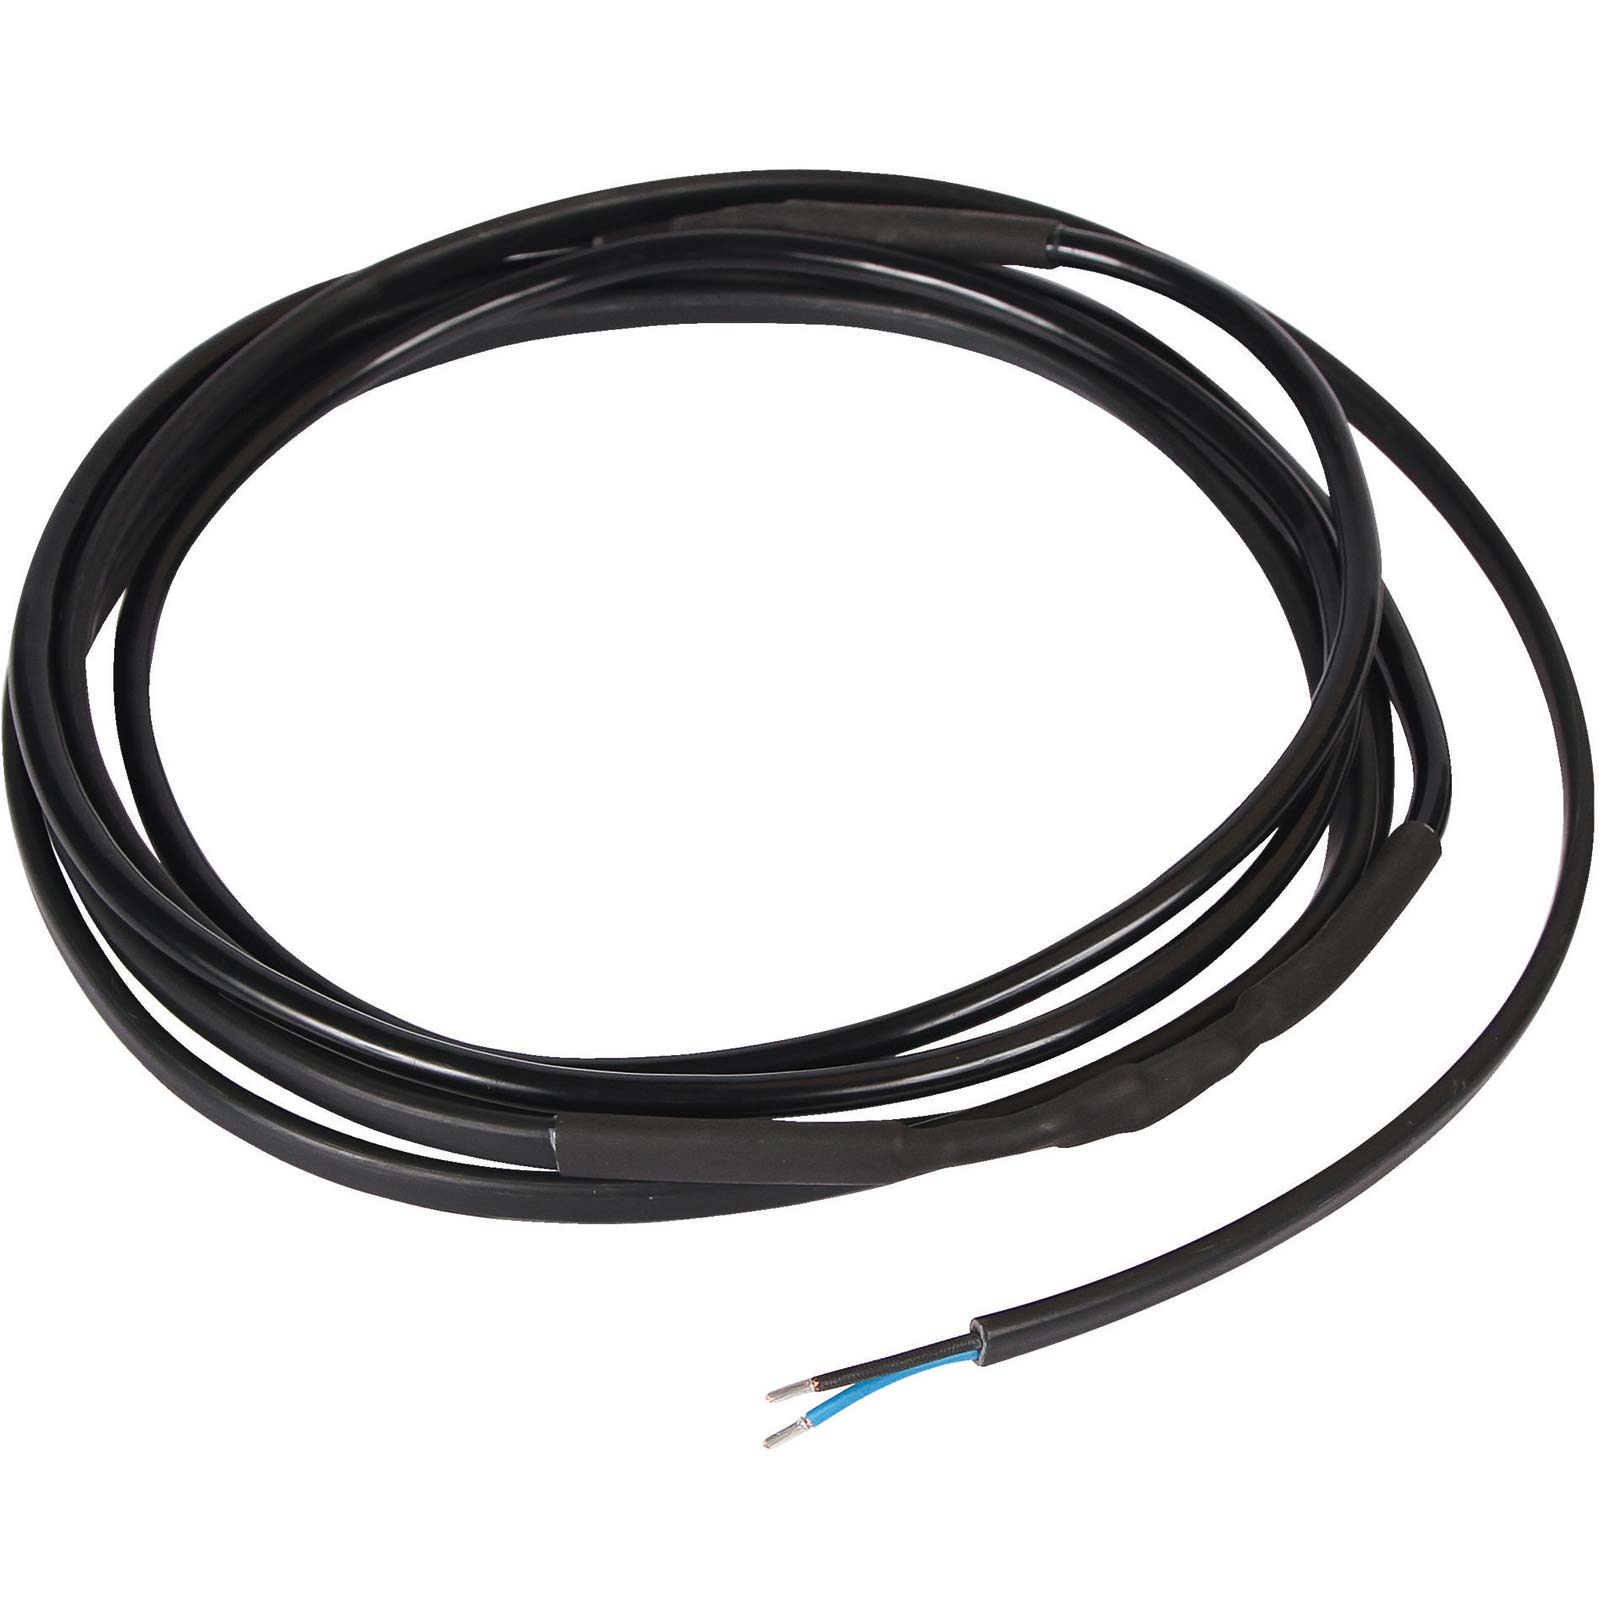 24 V Frost-Protection Heating Cable